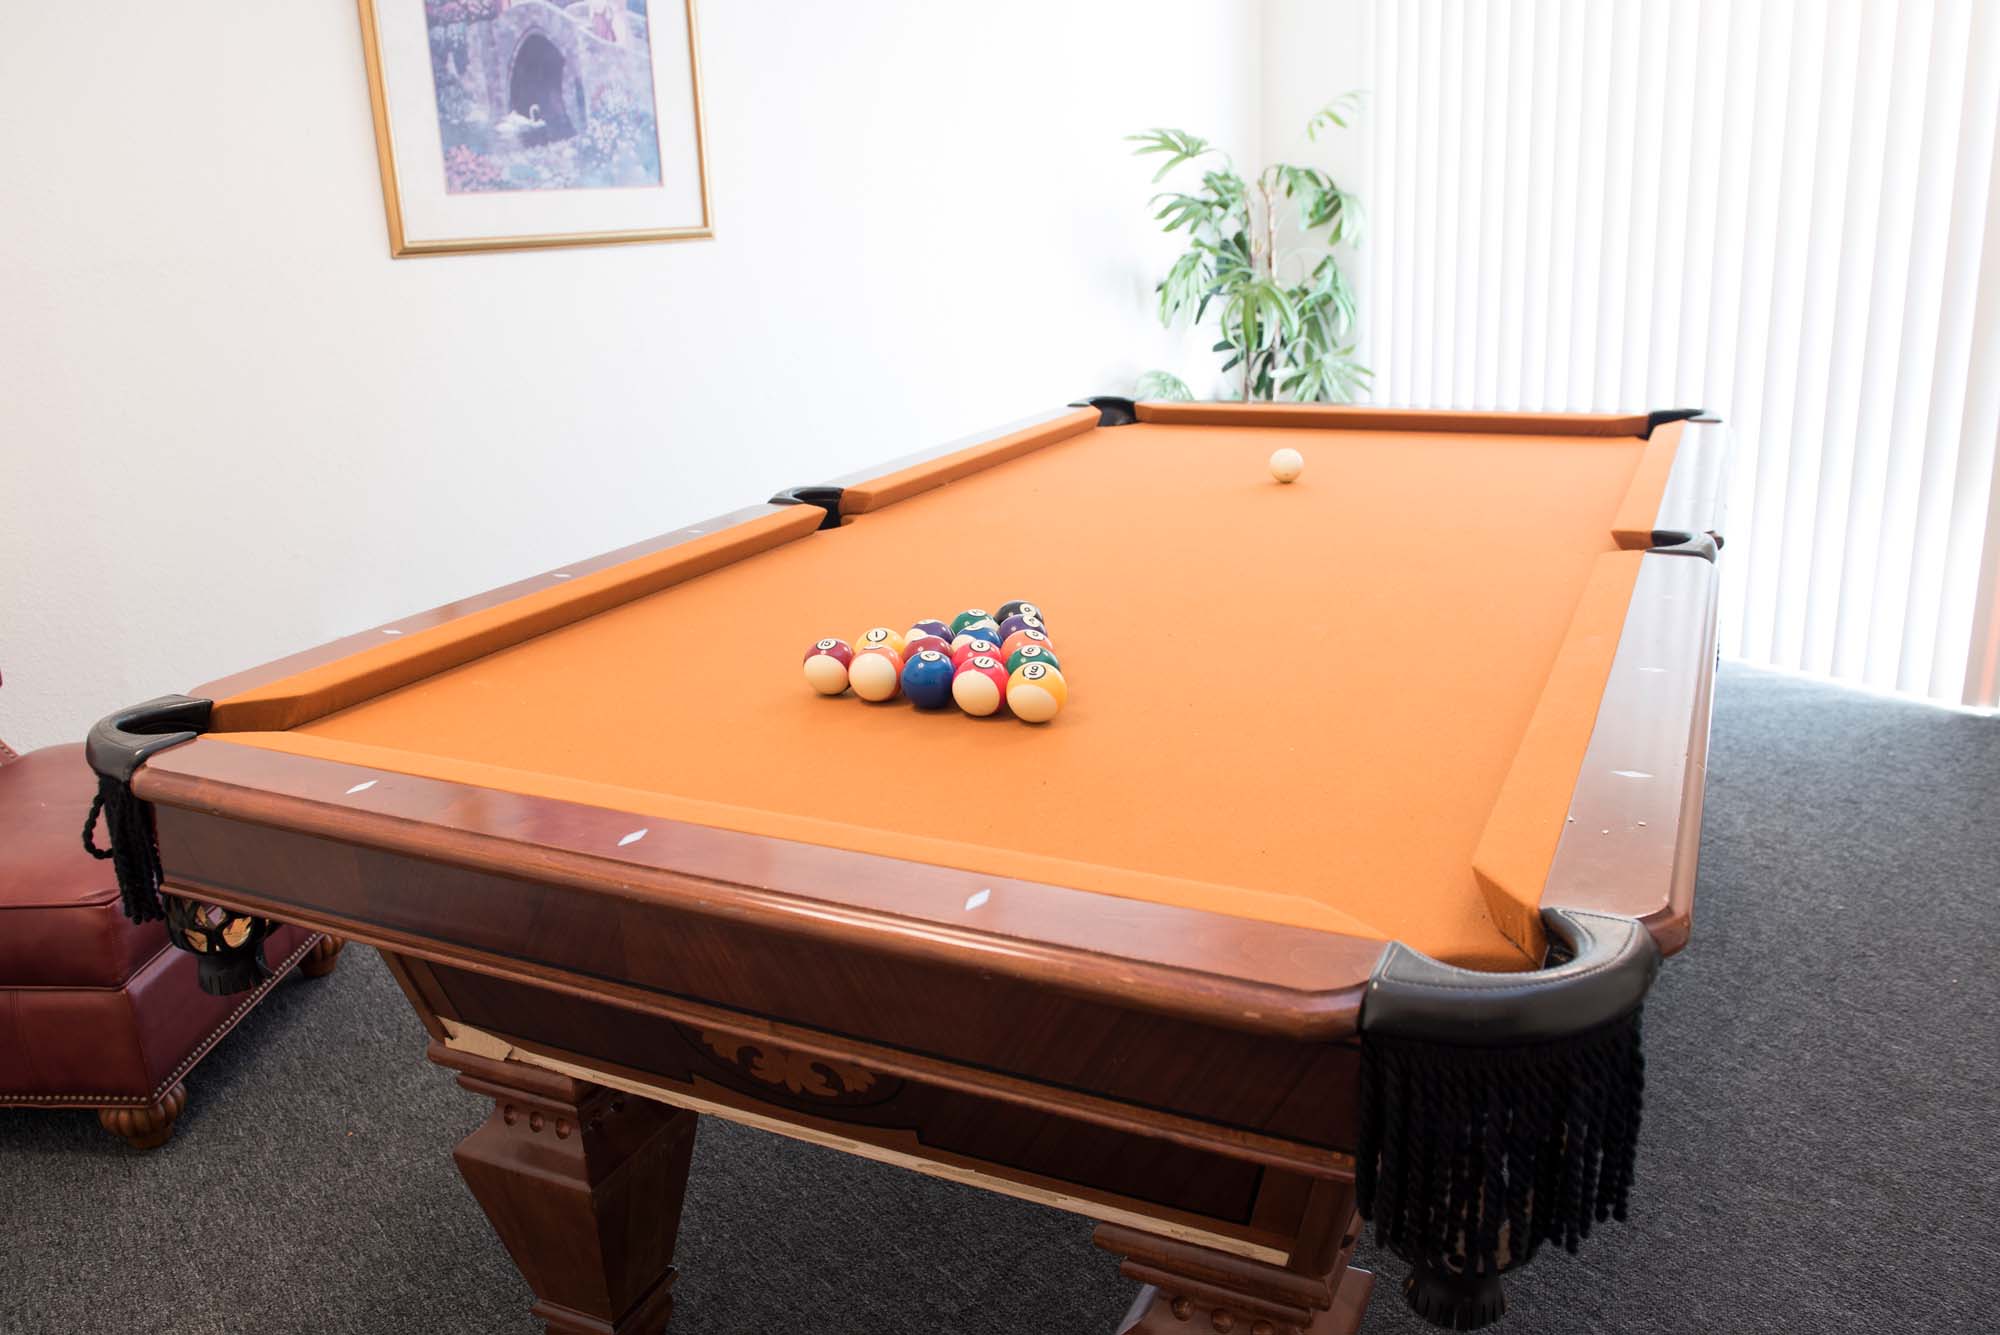 Our community room / pool table